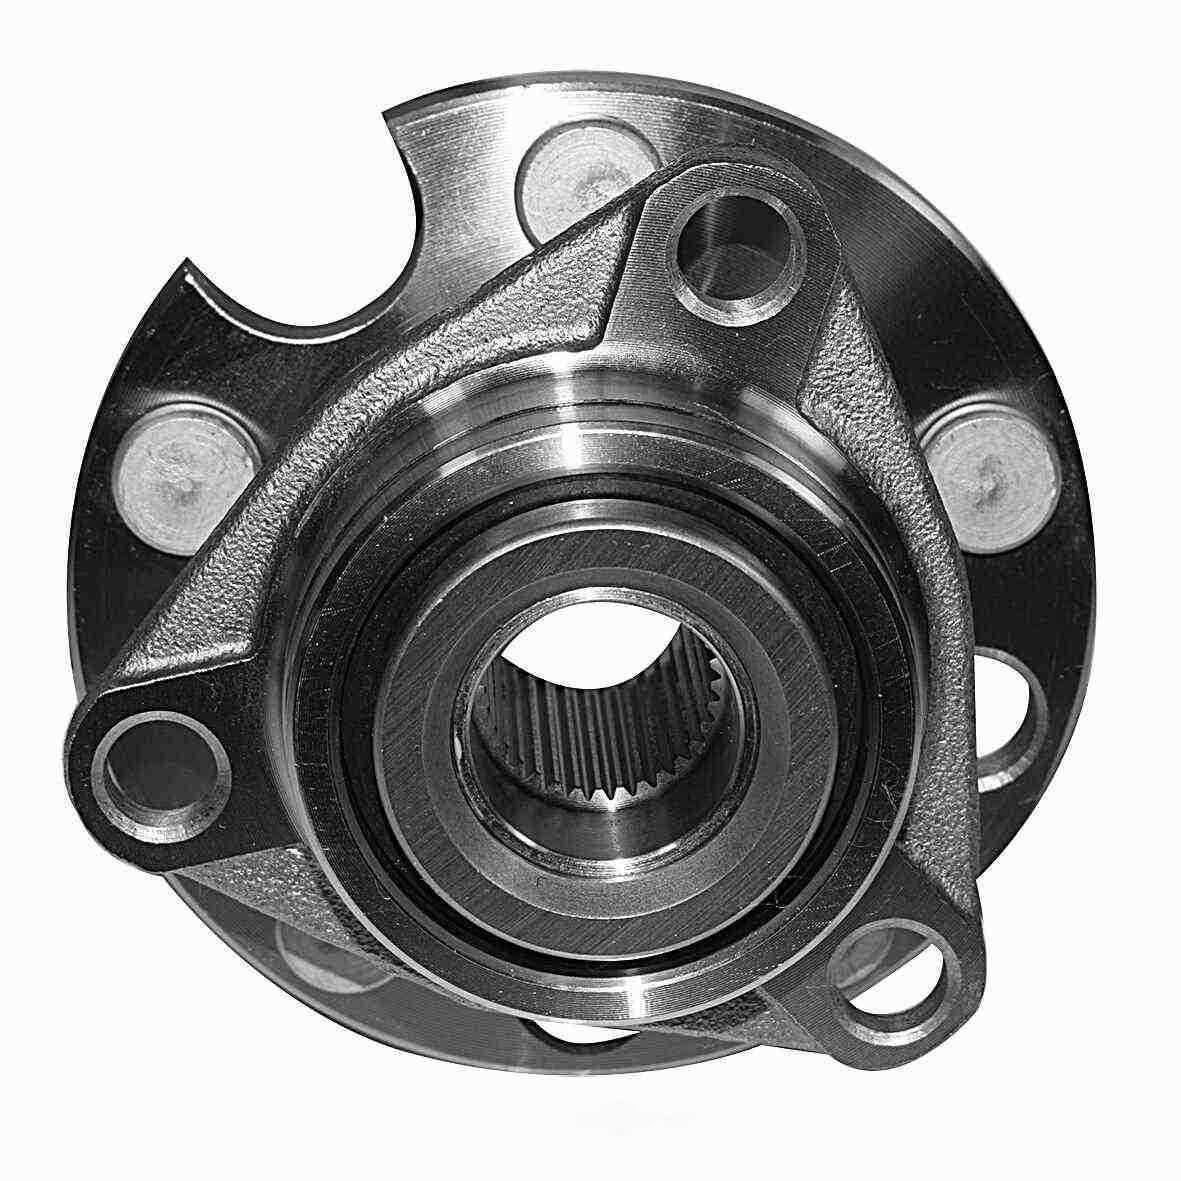 GSP NORTH AMERICA INC. - GSP New Wheel Bearing and Hub Assembly (Front Right) - AD8 104011